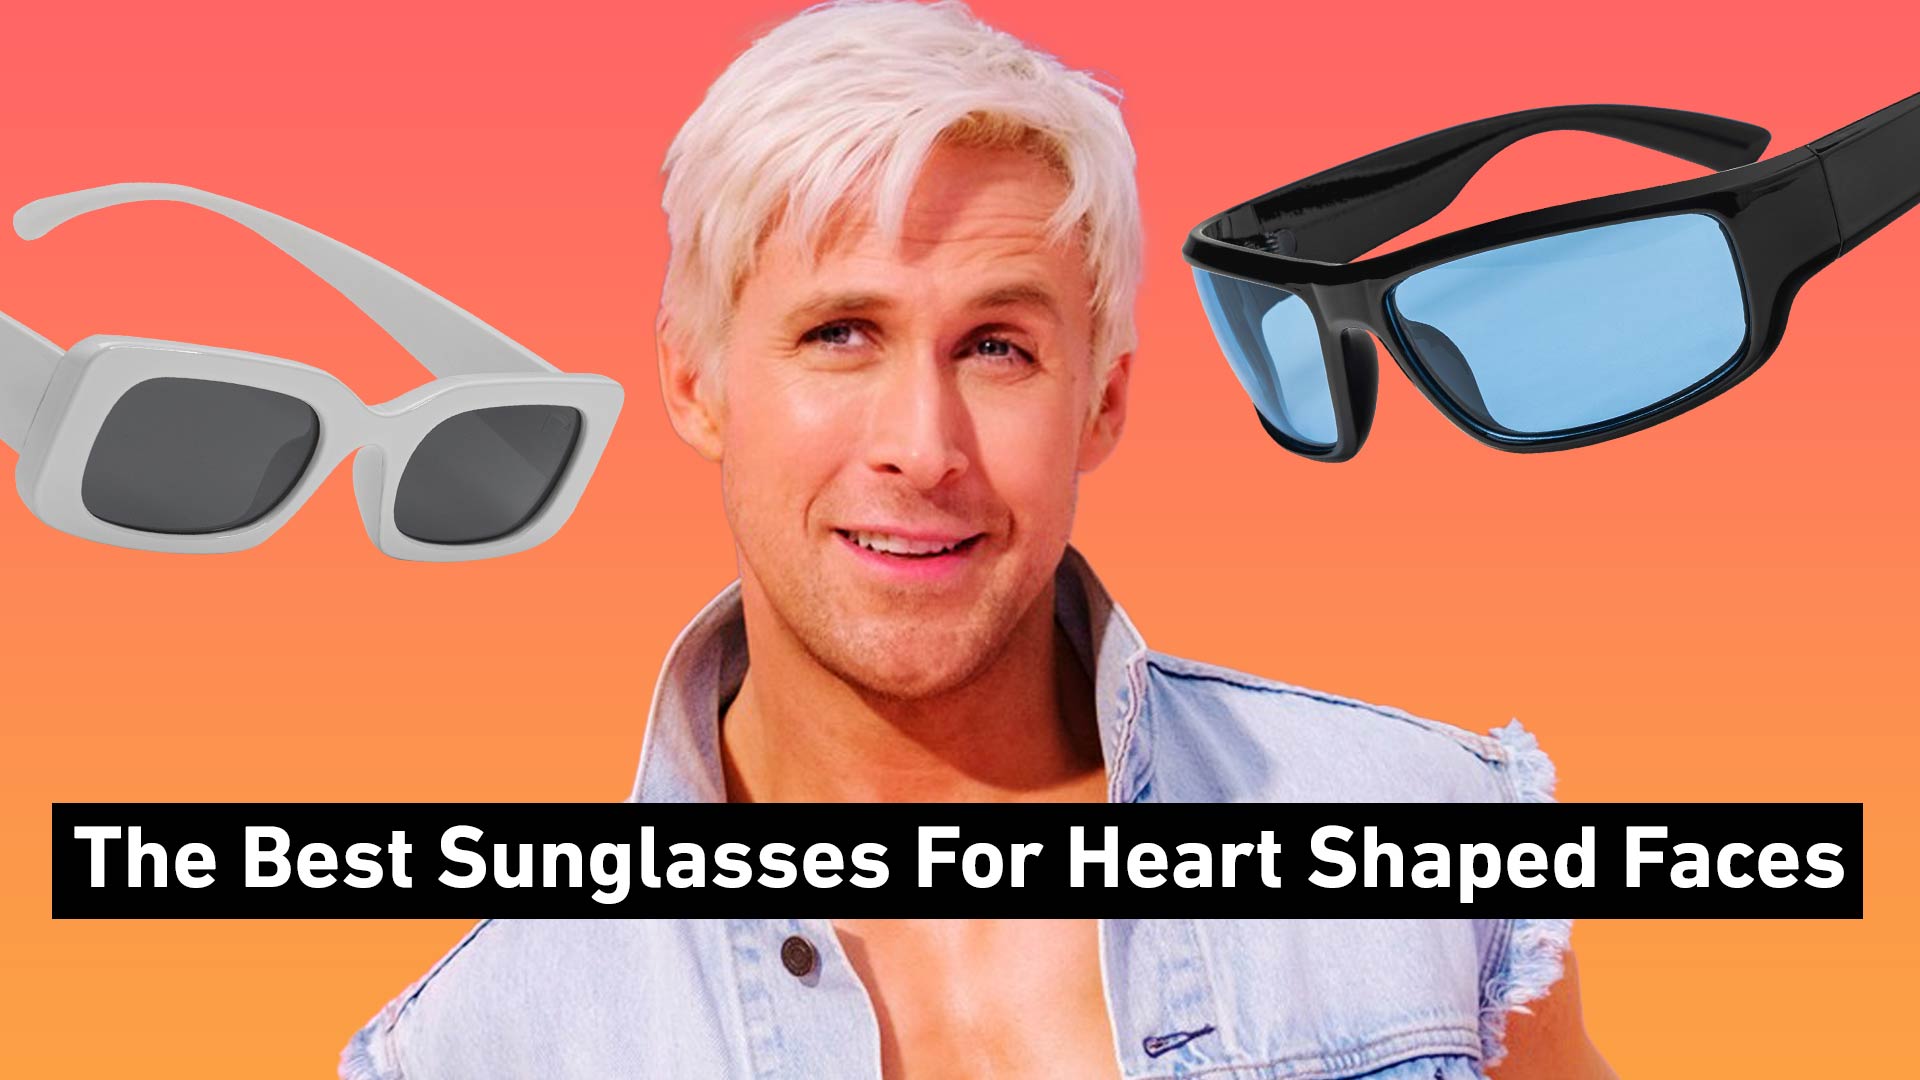 The Best Sunglasses For Heart Shaped Faces